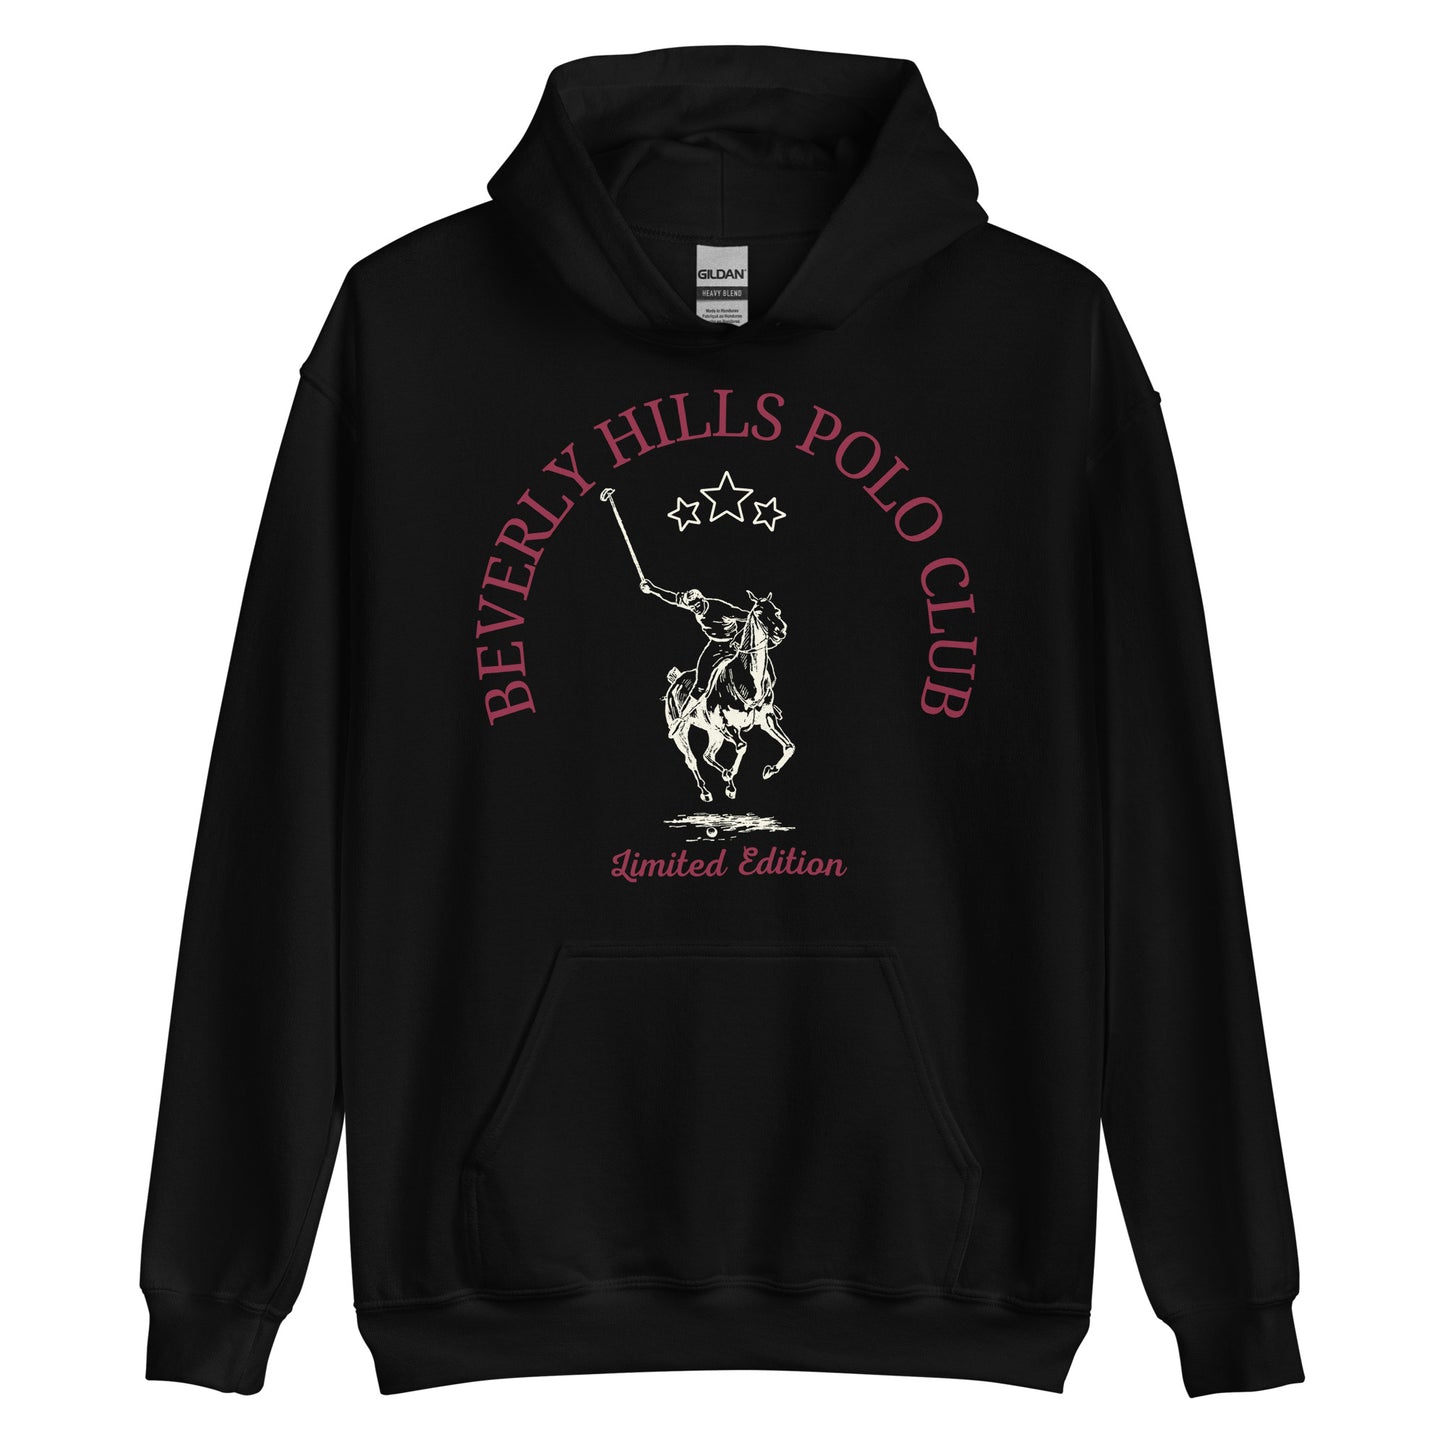 A black hoodie features the 'Beverly Hills Polo Club' logo with a white illustration of a polo player on horseback, accompanied by three white stars above and the words 'Limited Edition' below. The design is centered on the chest of the hoodie, which has a front pouch pocket and is displayed on a plain background.